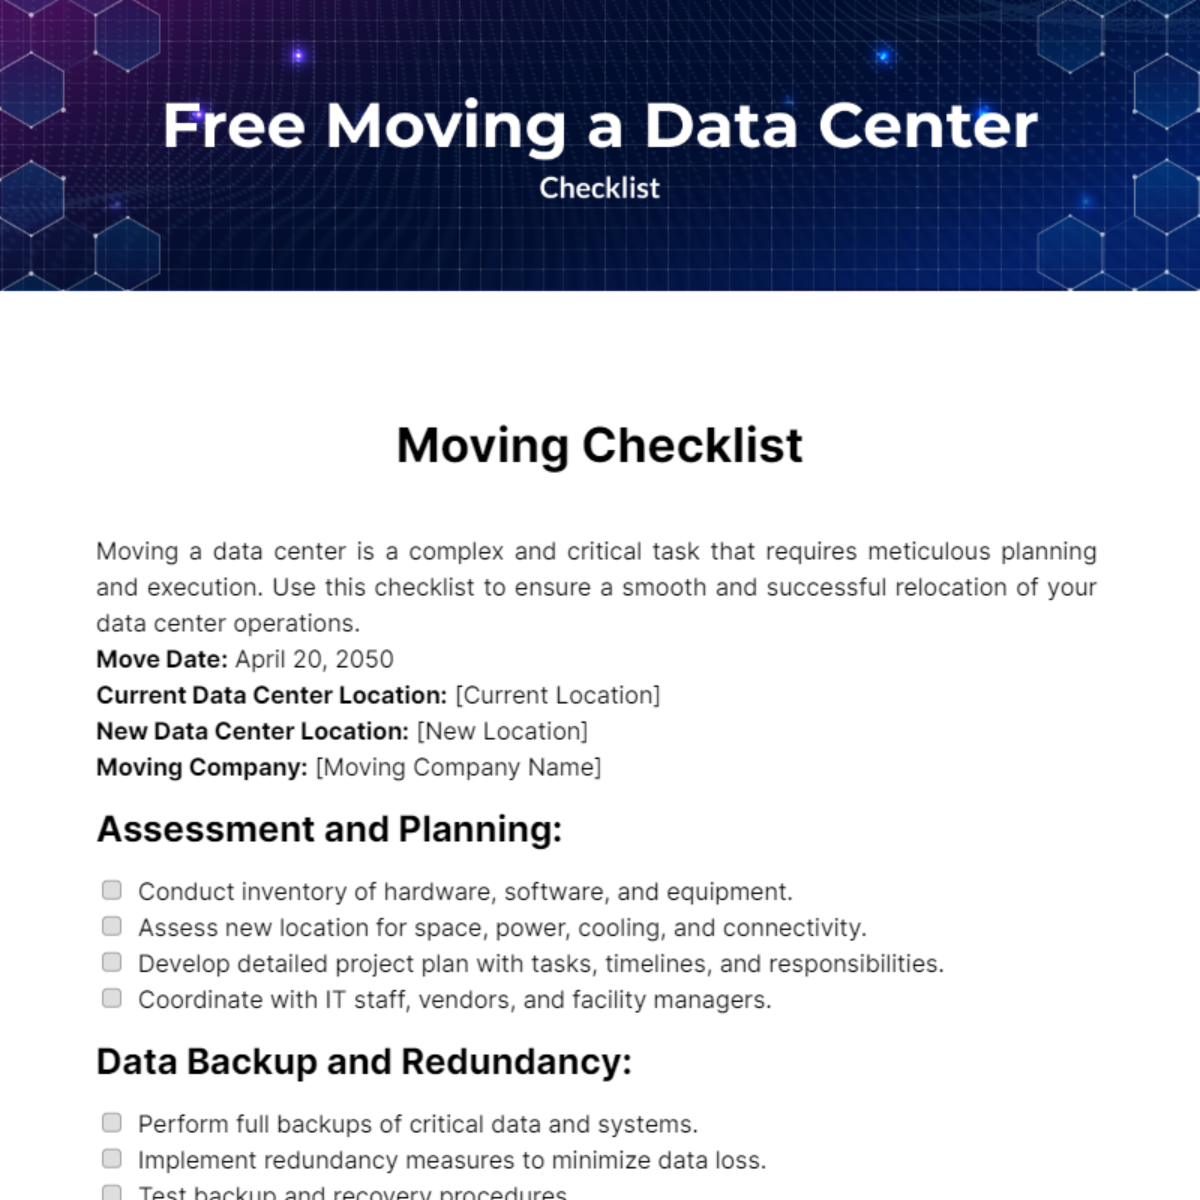 Free Moving a Data Center Checklist Template